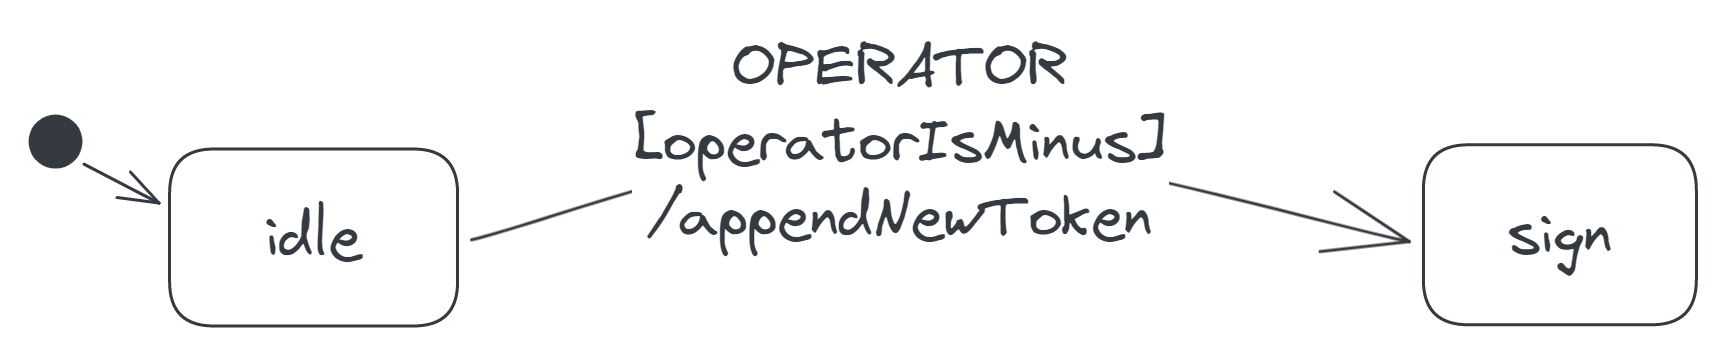 A transition labelled 'OPERATOR[operatorIsMinus]/appendNewToken', from the idle to the sign state.